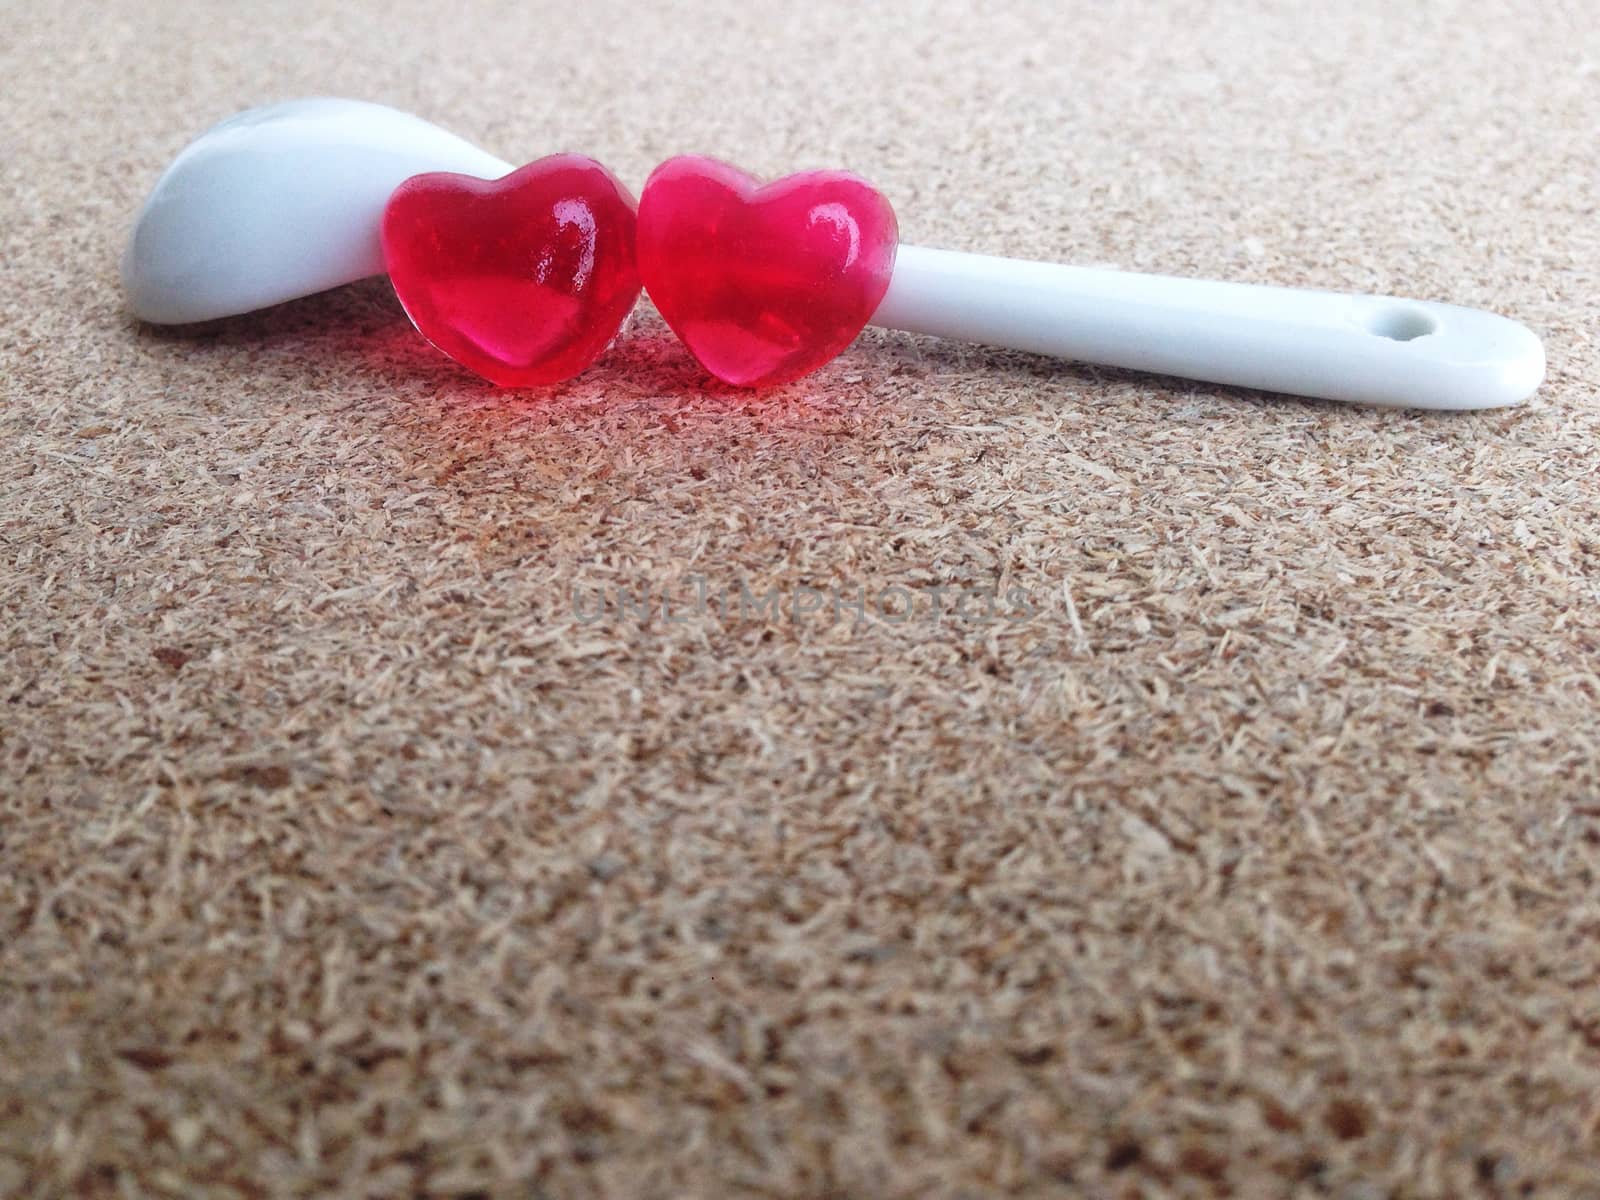 Mini heart couple with white little spoon on plywood by Bowonpat